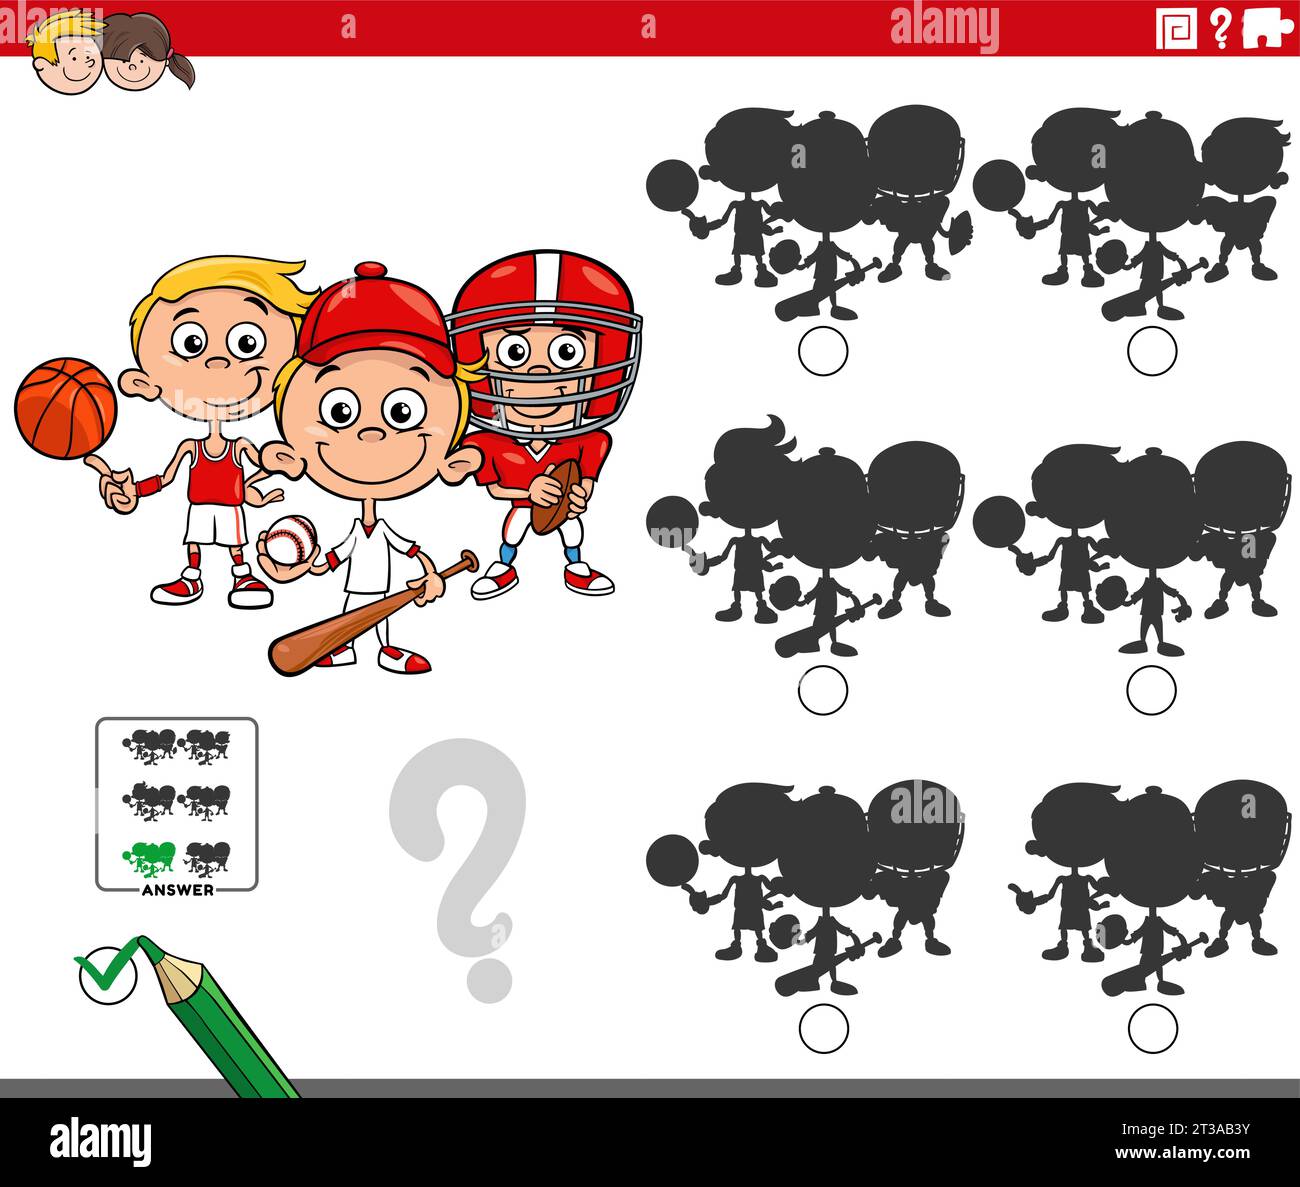 Cartoon illustration of finding the right picture to the shadow educational game with boys practicing various sports Stock Vector